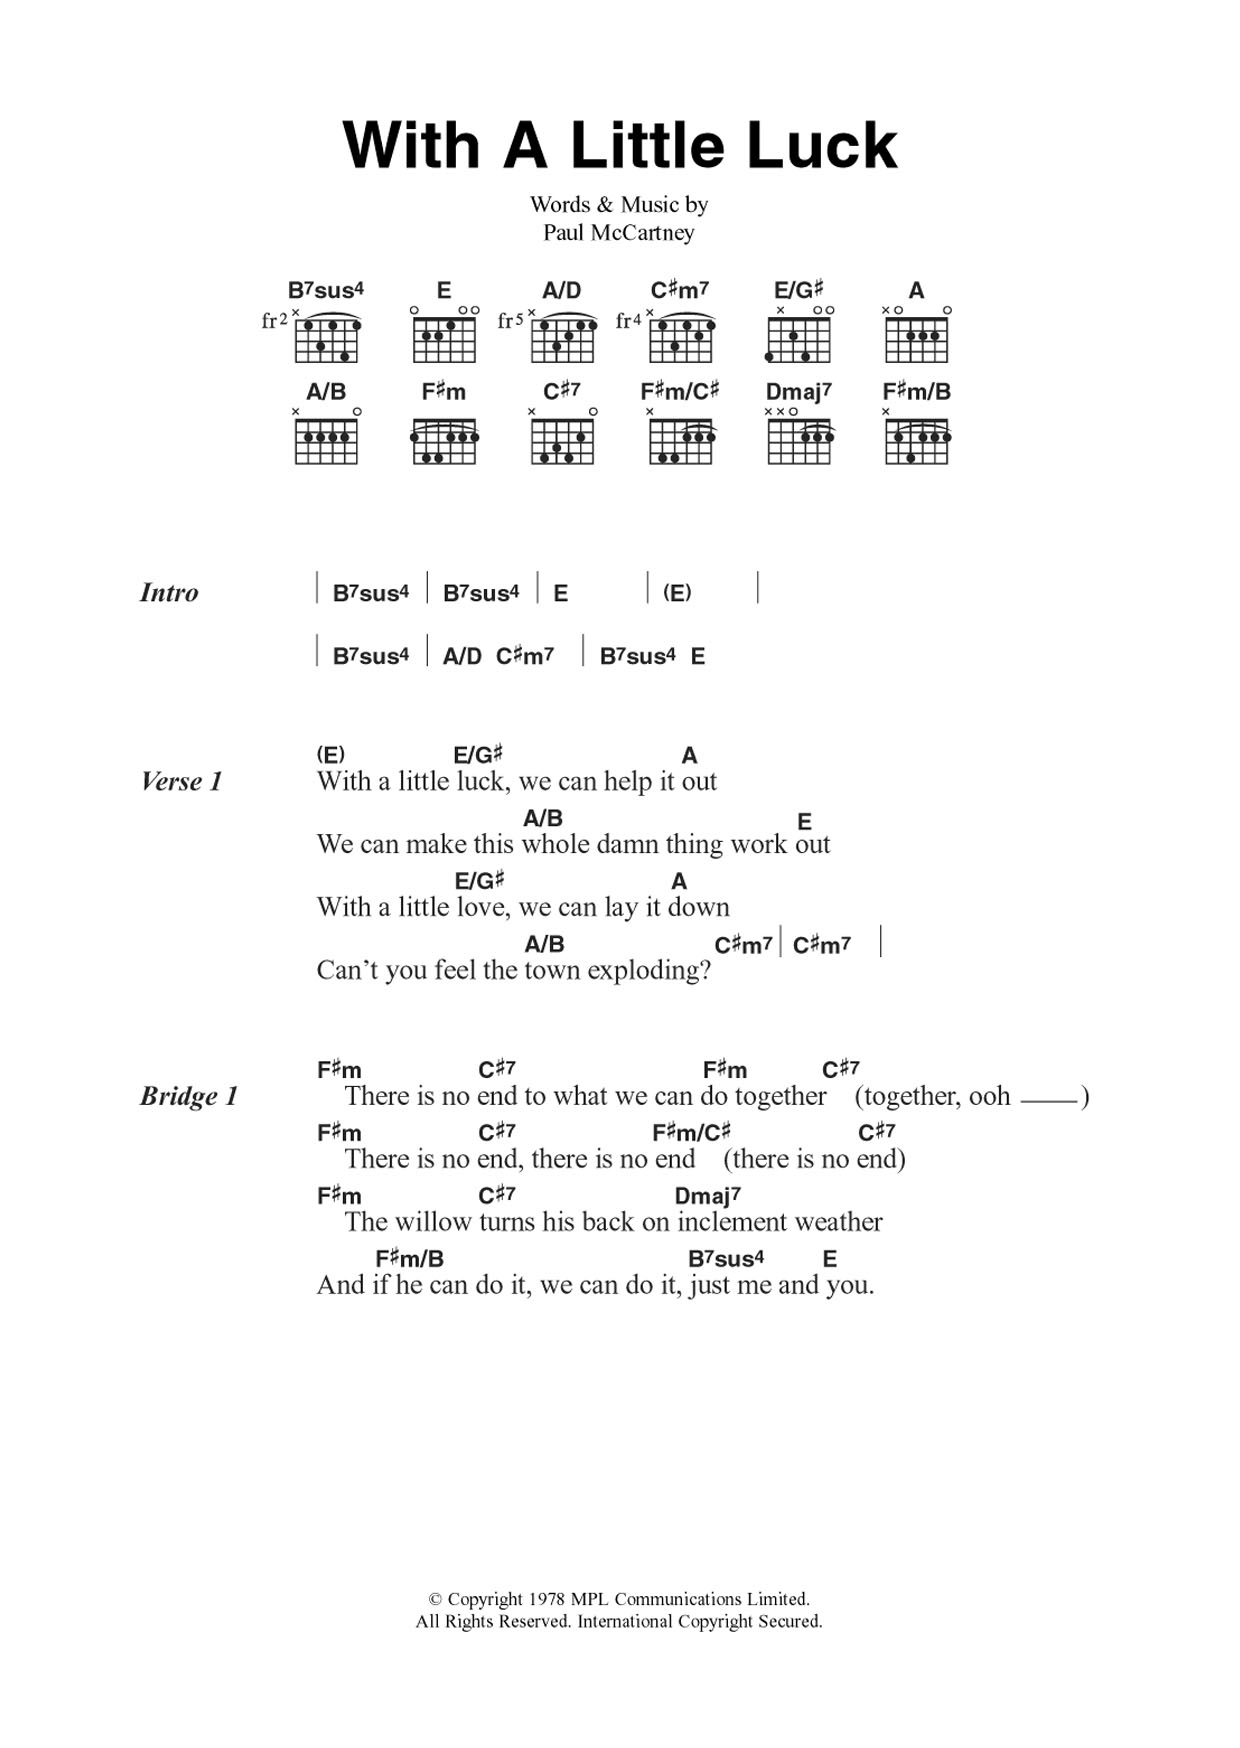 Download Wings With A Little Luck Sheet Music